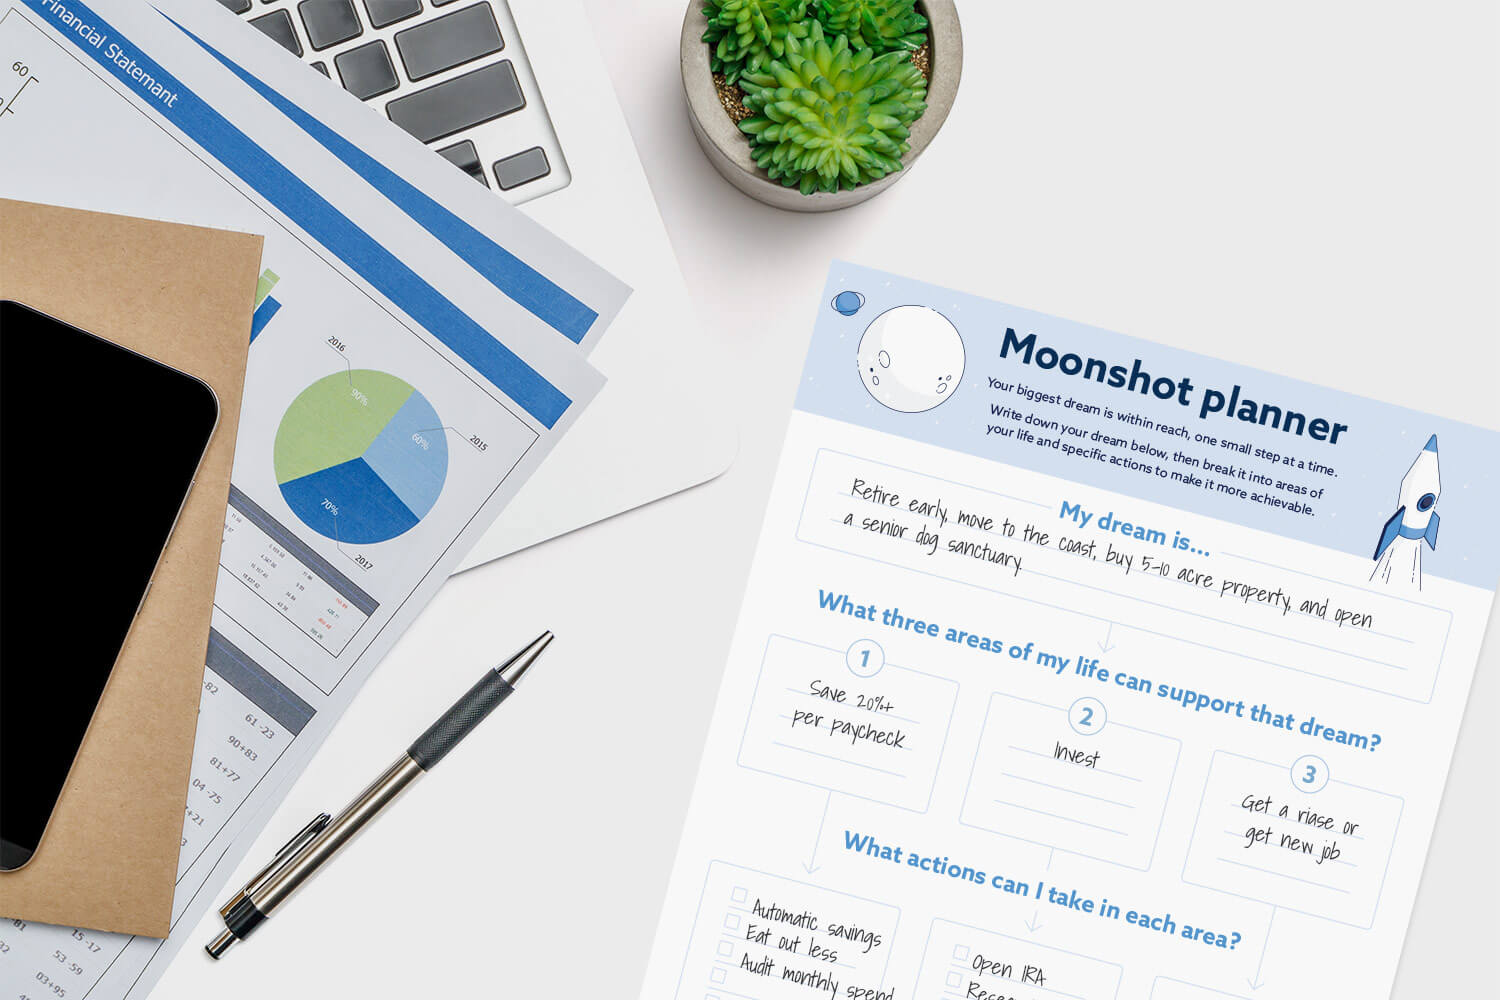 Picture illustrates Moonshot planner template